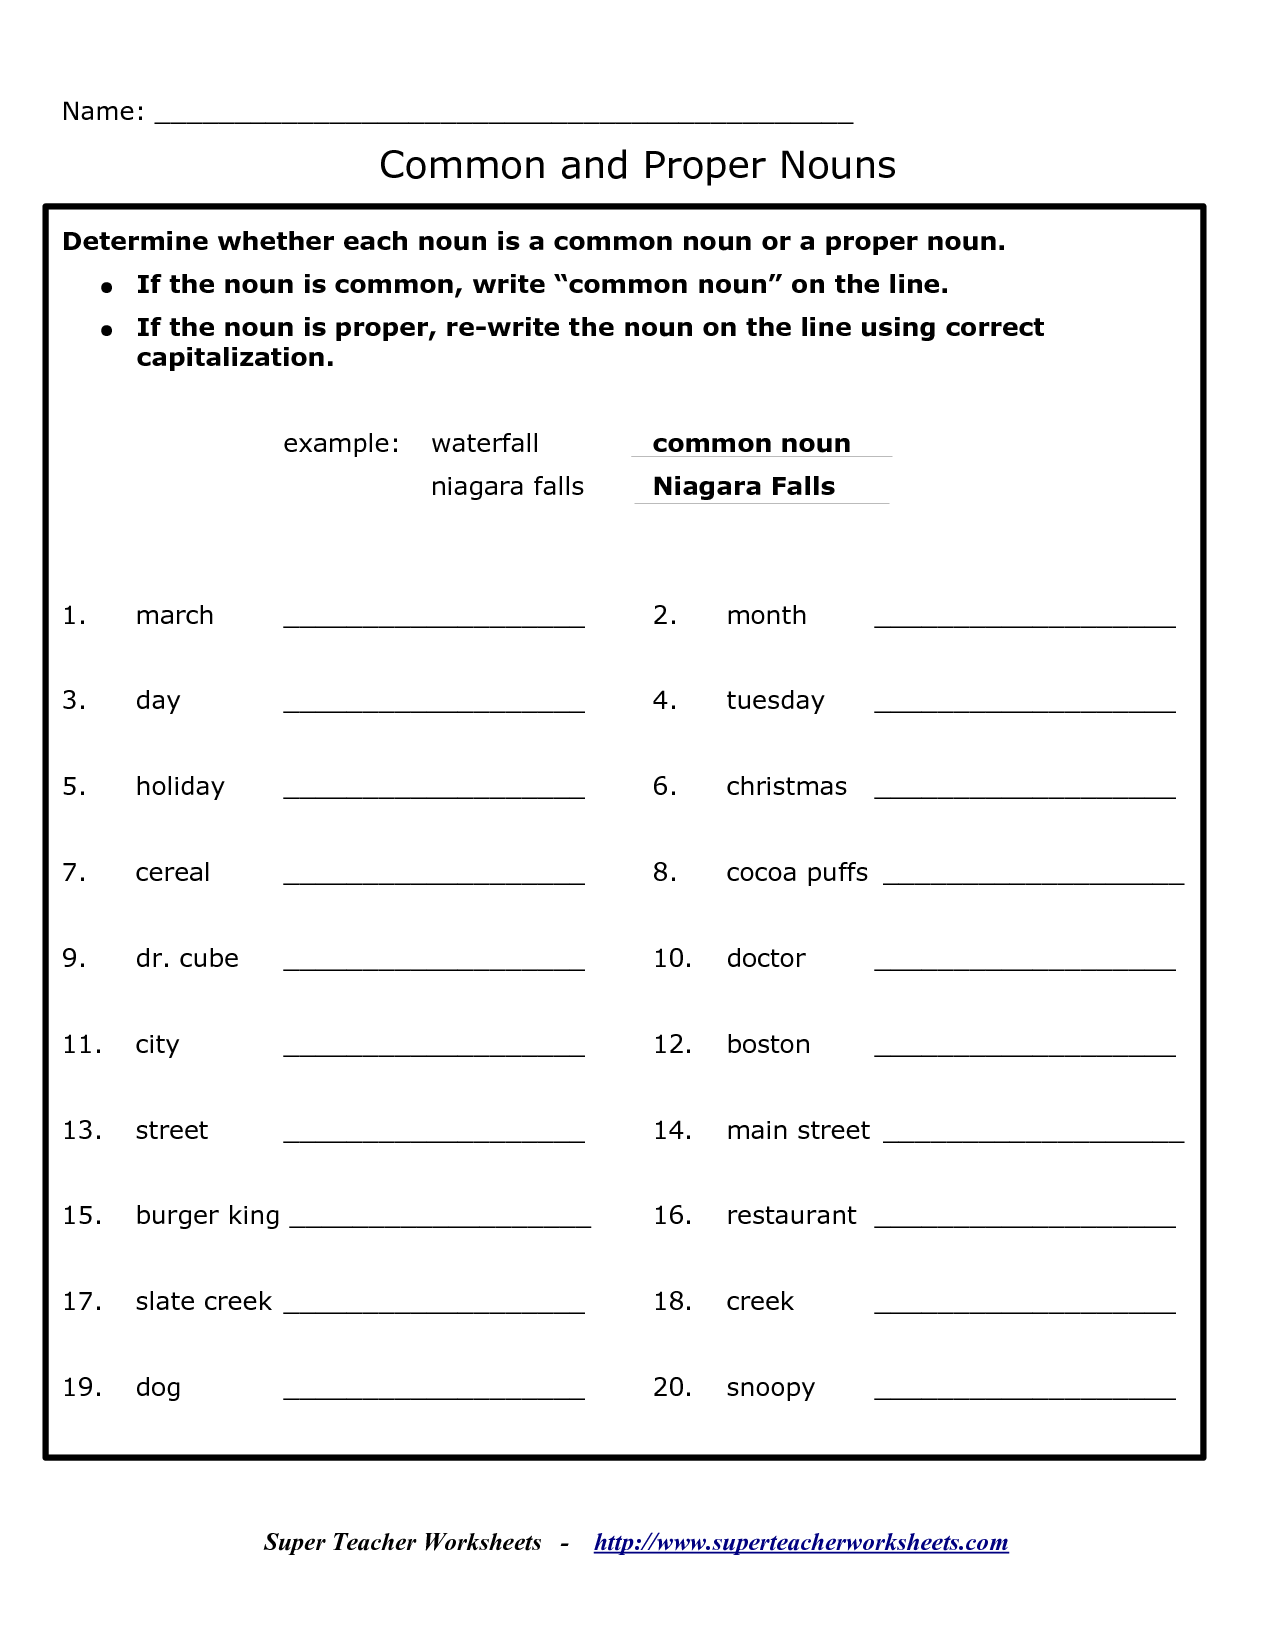 17-best-images-of-proper-common-nouns-worksheet-32nd-grade-common-and